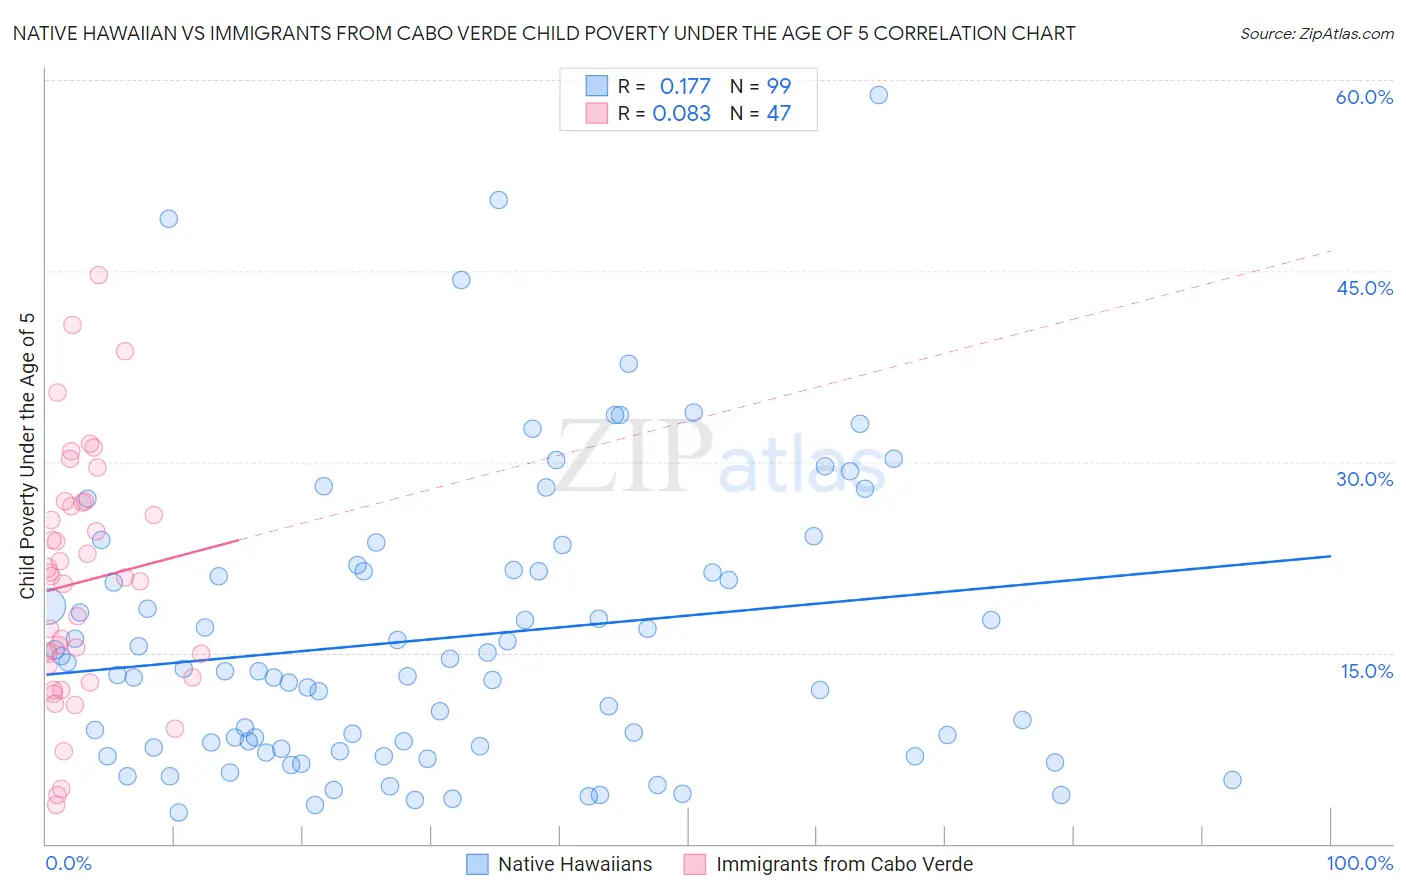 Native Hawaiian vs Immigrants from Cabo Verde Child Poverty Under the Age of 5